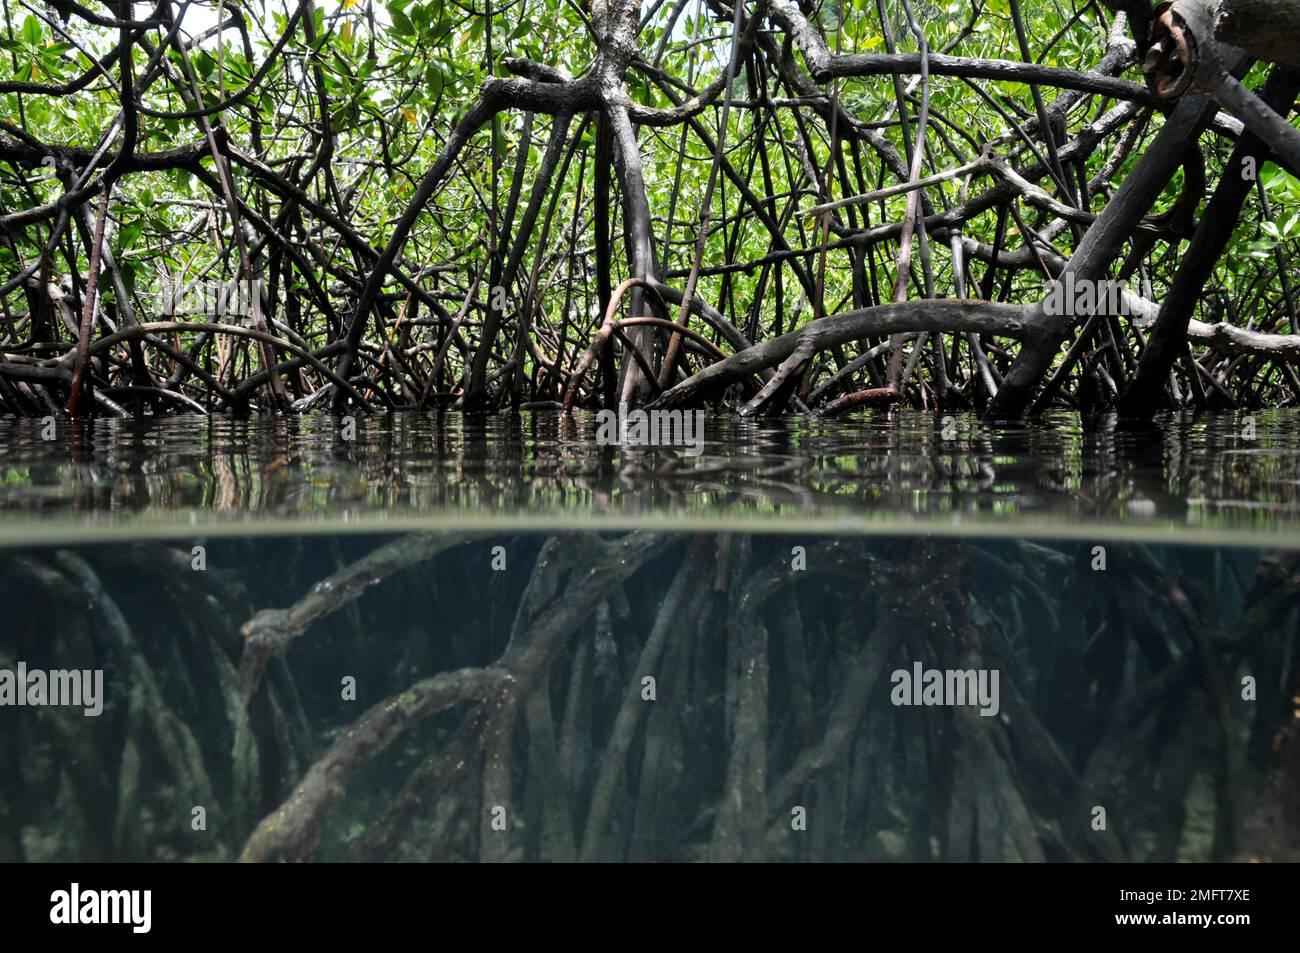 Mangroves in the tropics, Indonesia Stock Photo